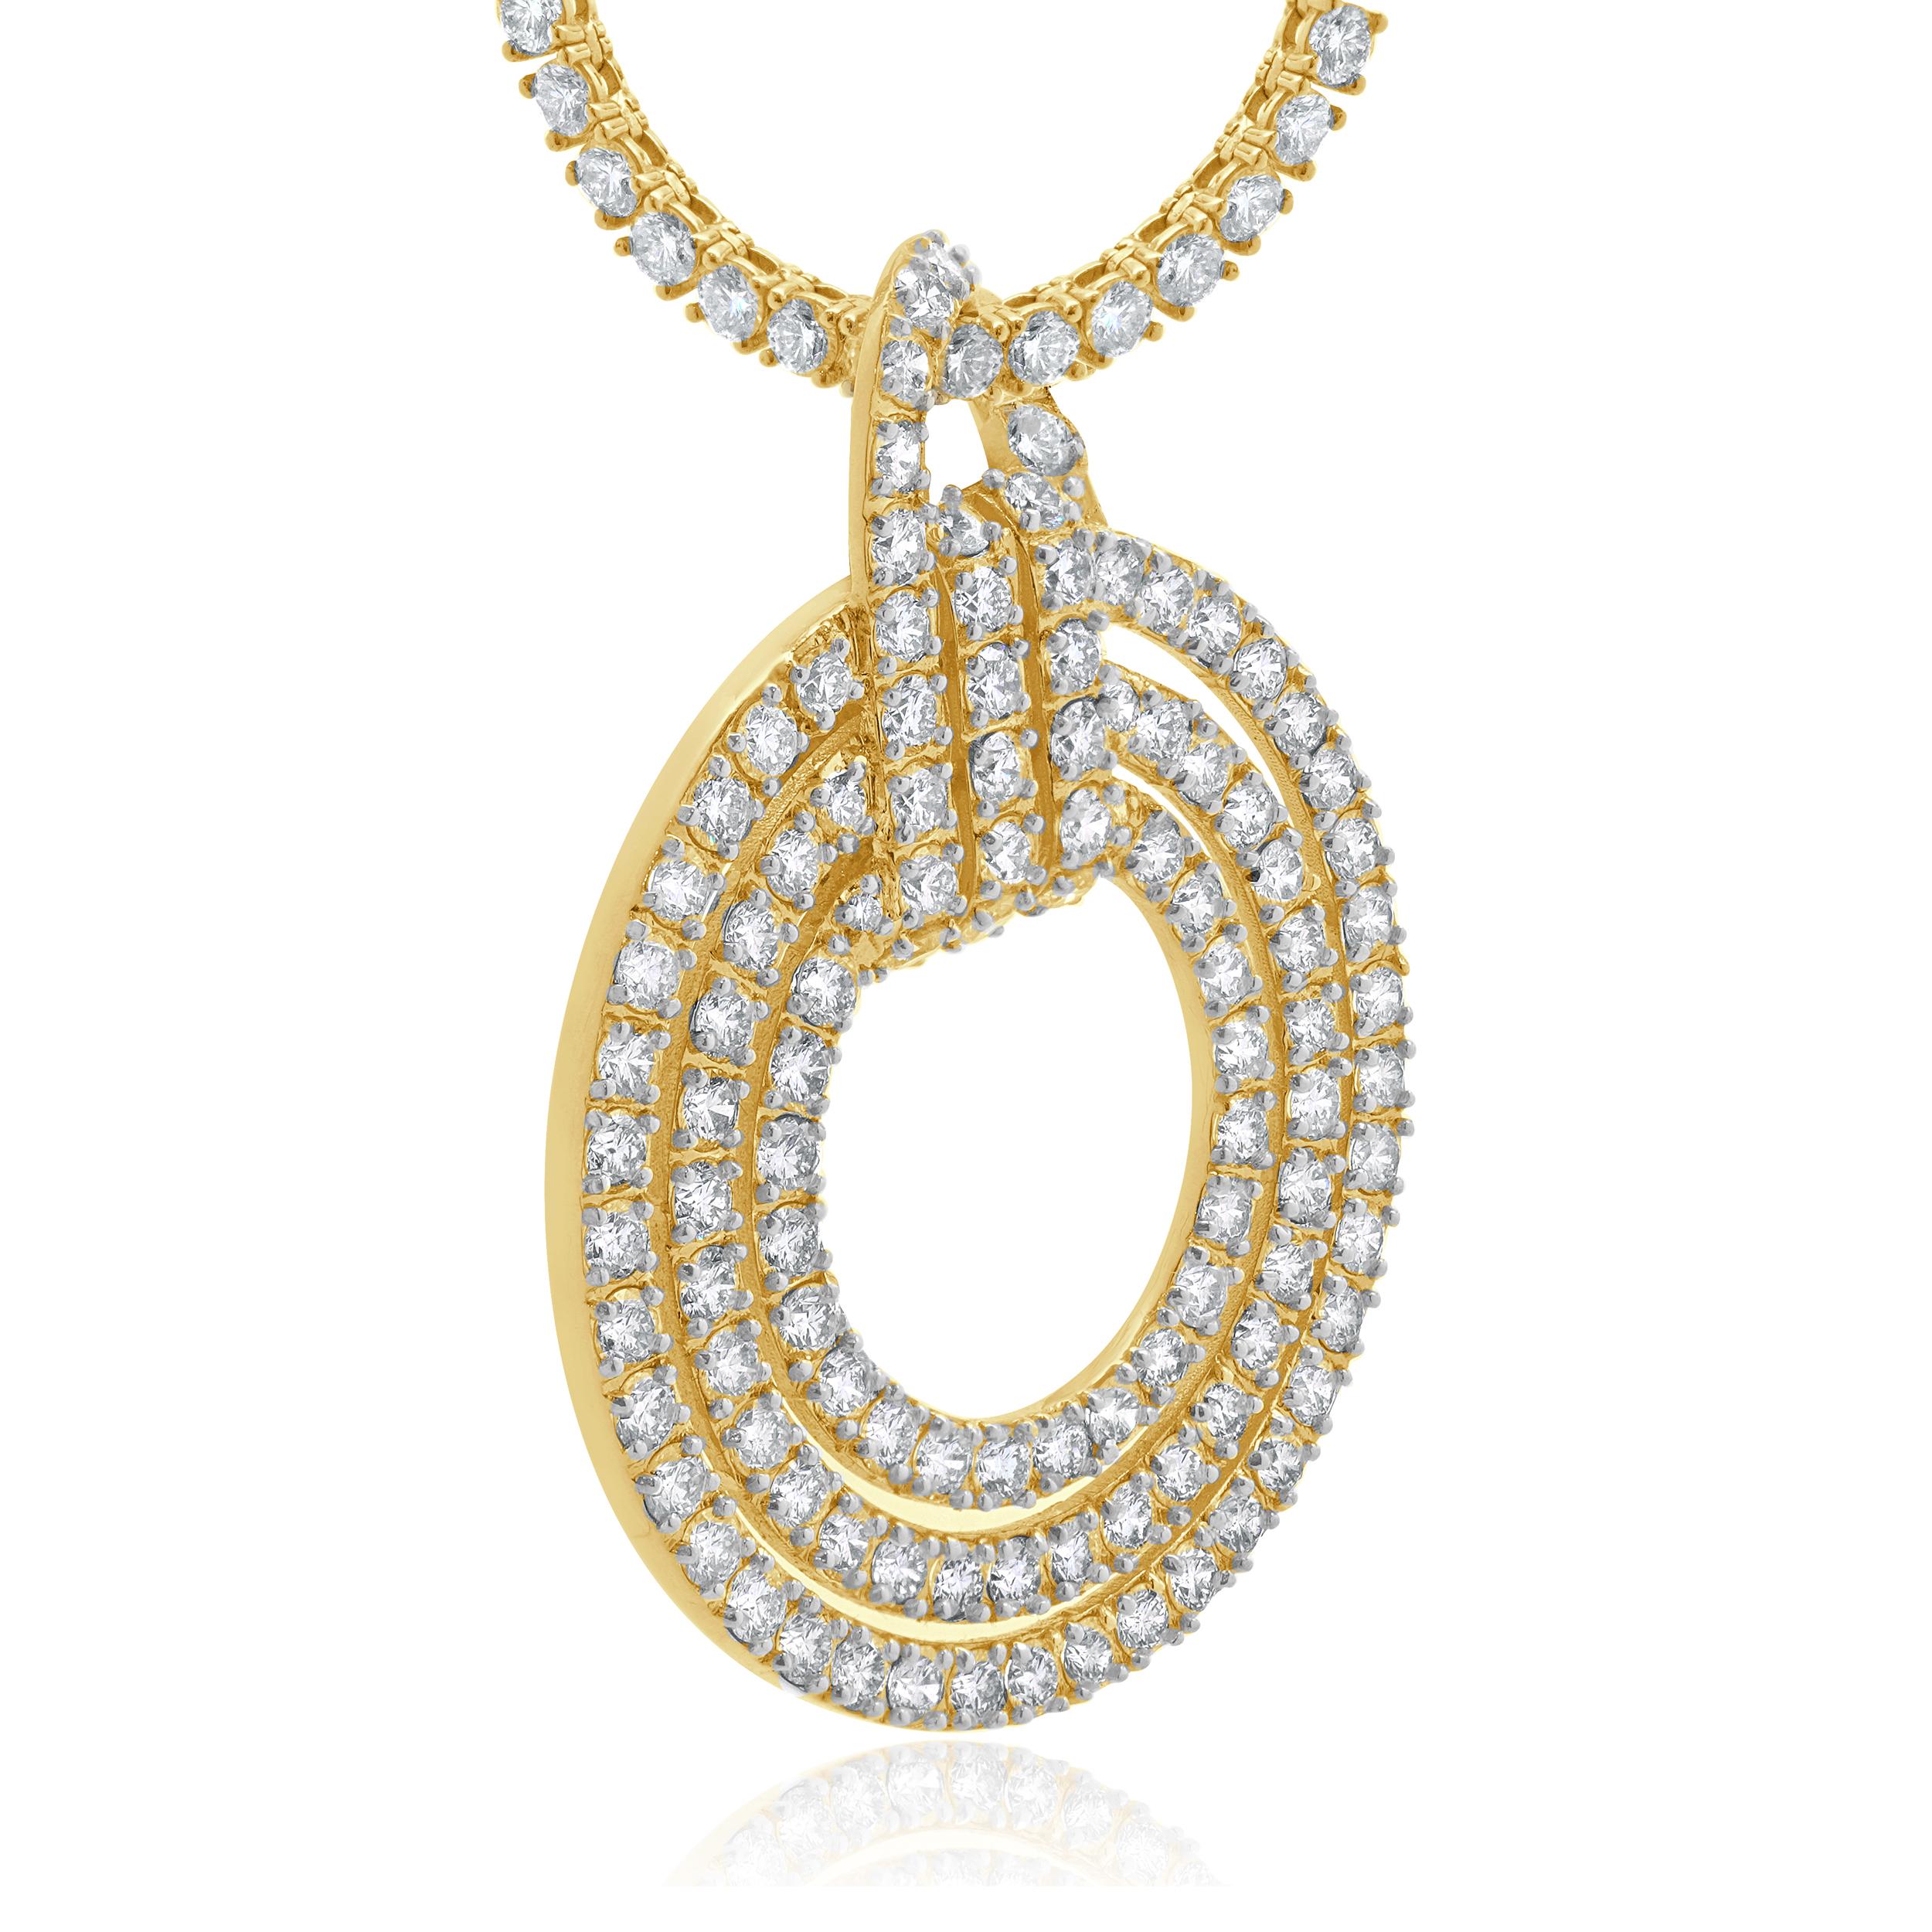 Designer: custom
Material: 14K yellow gold
Diamonds: 247 round brilliant cut = 21.35cttw
Color: G
Clarity:VS- SI1
Dimensions: necklace measures 16-inches in length 
Weight: 32.81 grams